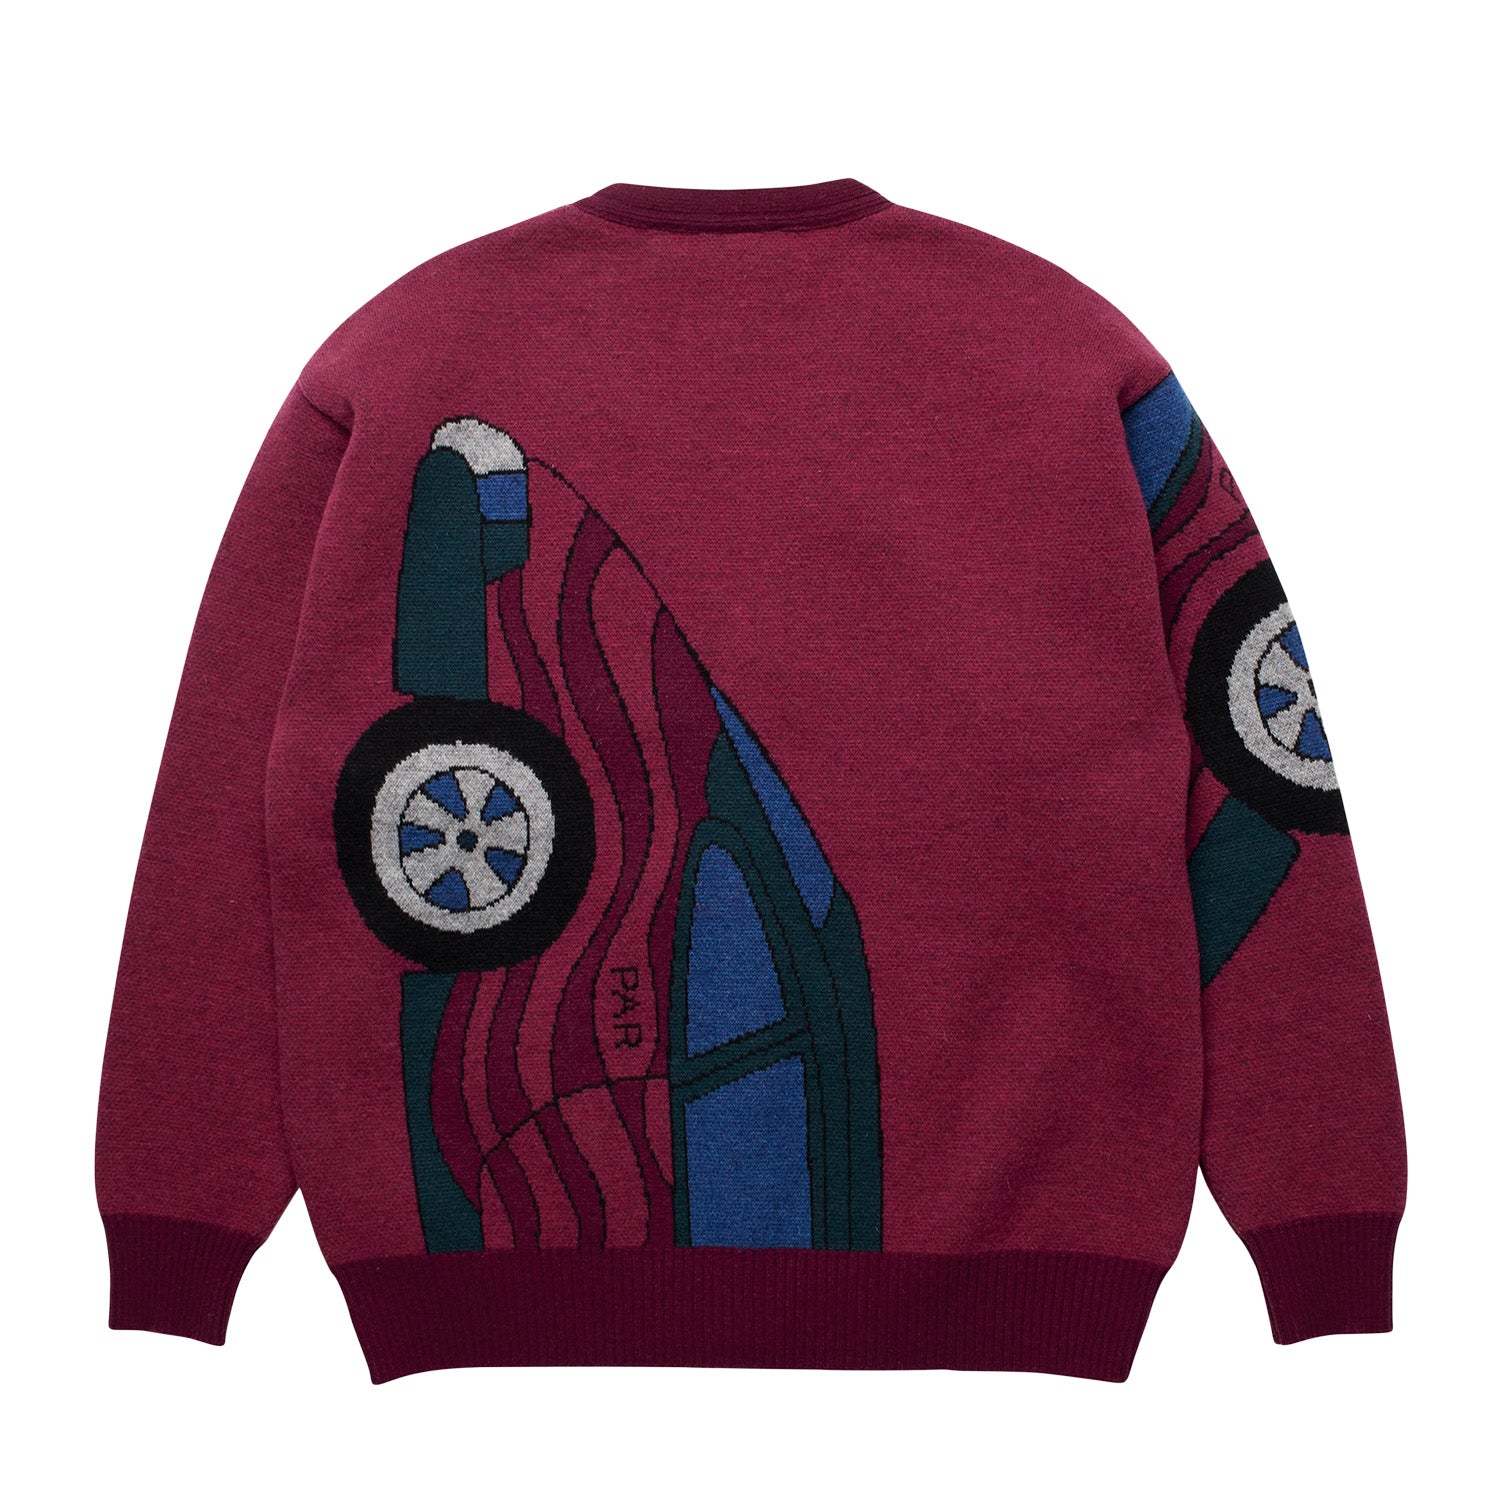 Parra no parking knitted cardigan 'Beet Red'